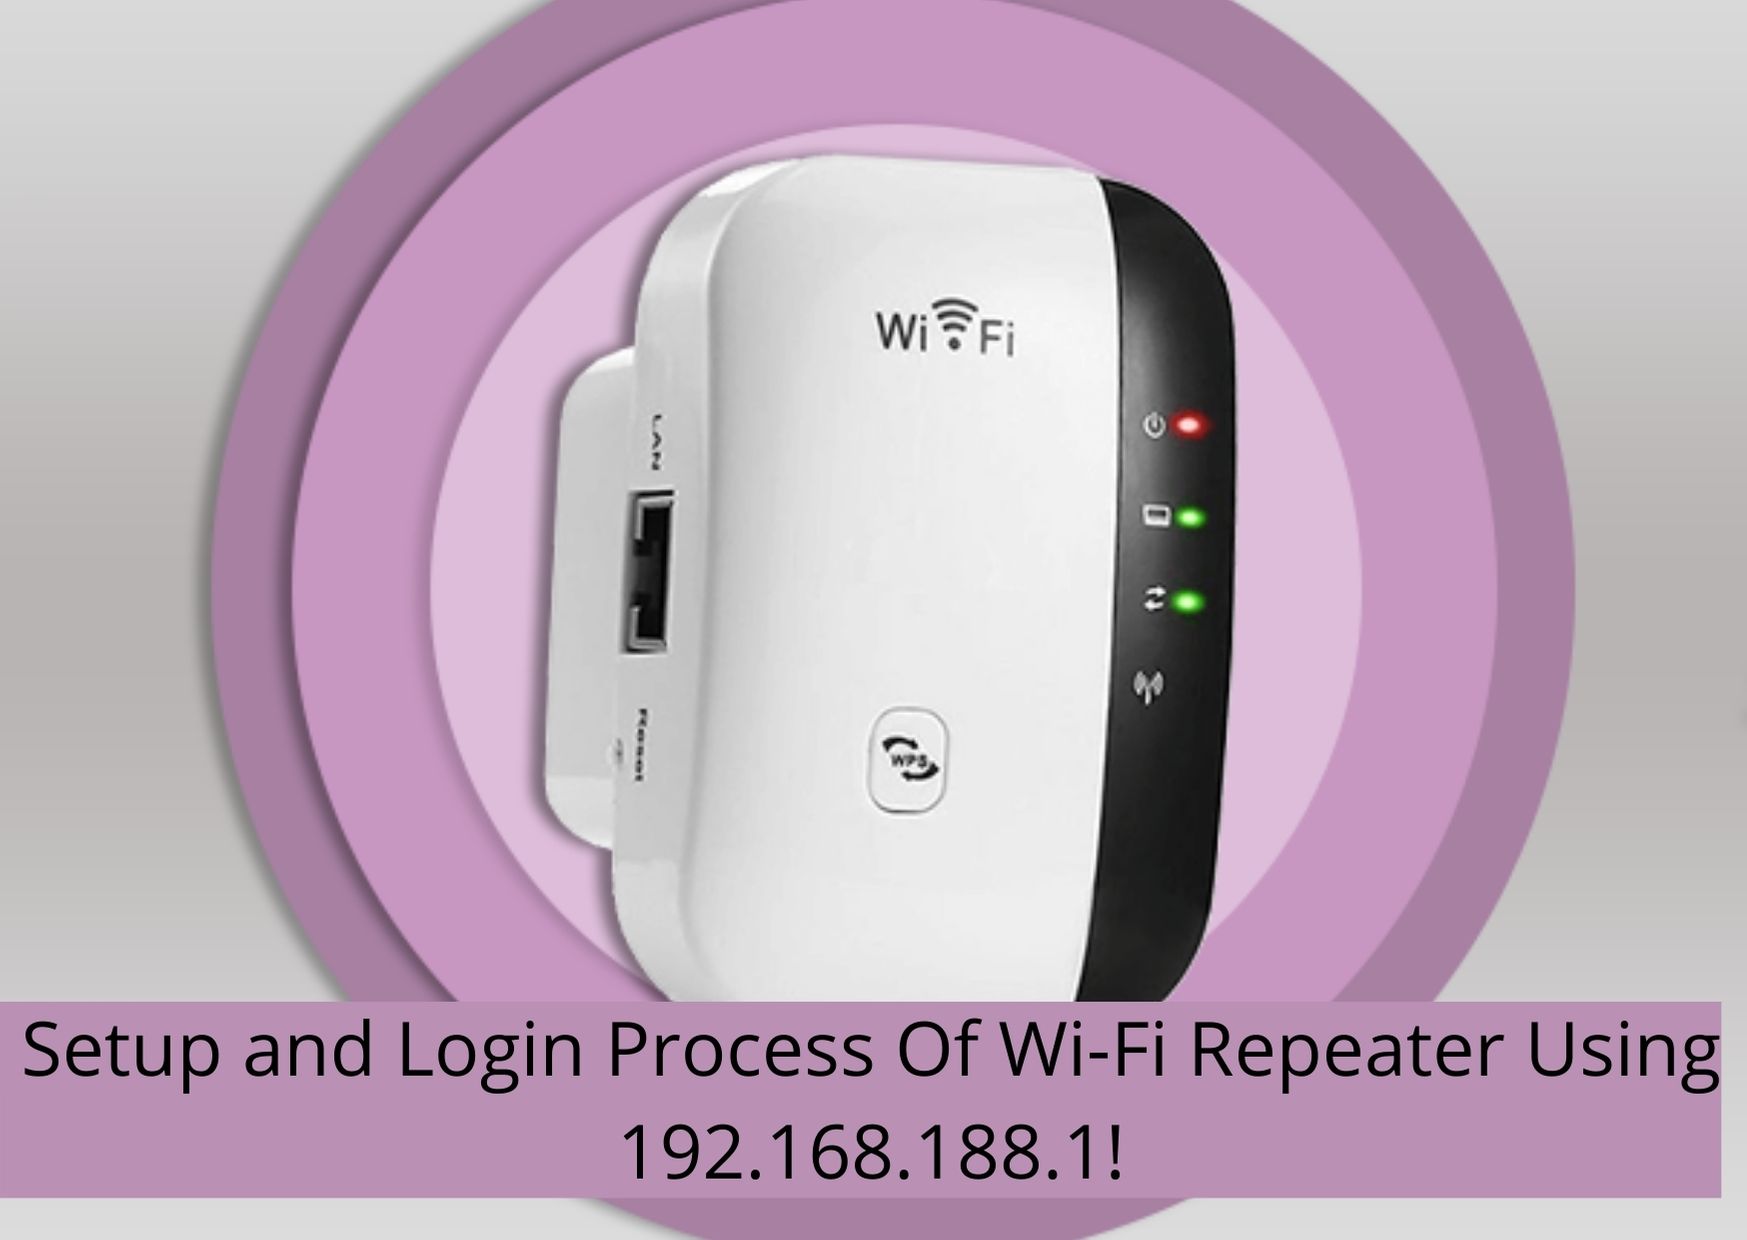 Wi-Fi Repeater Using 192.168.188.1